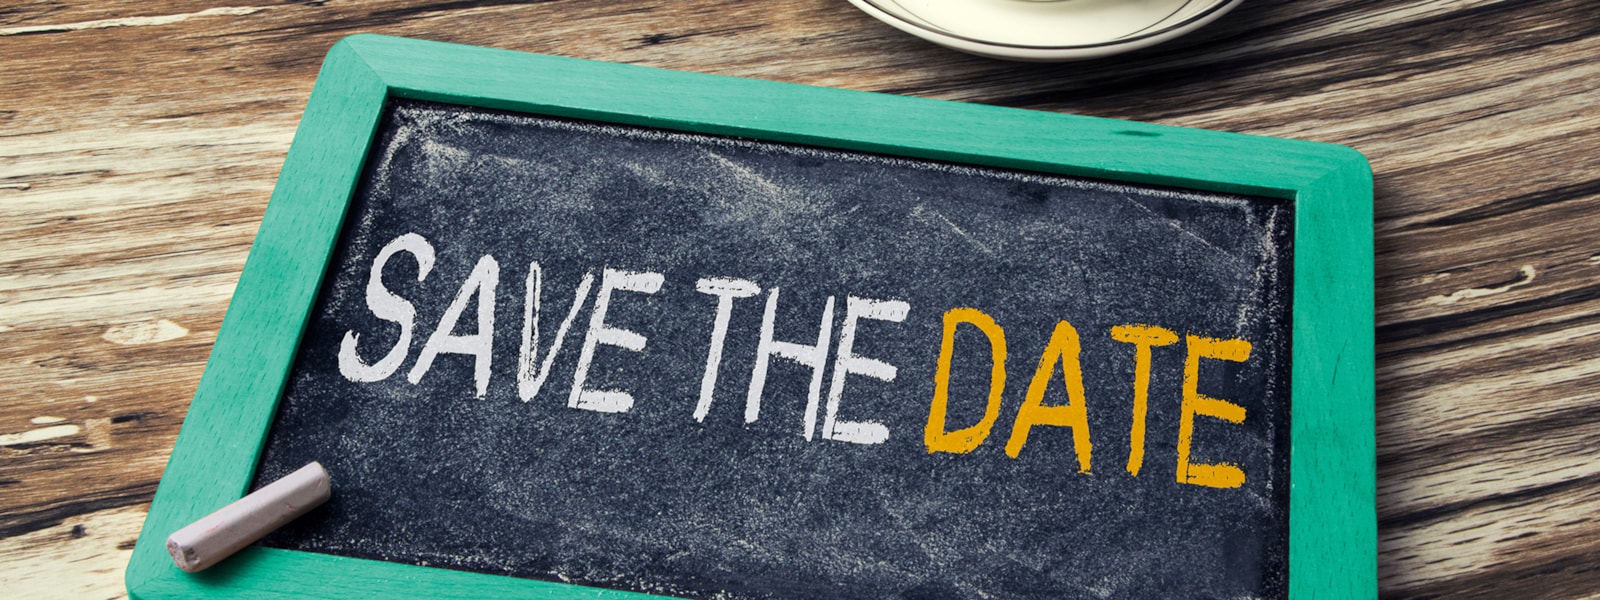 Save the date on chalkboard